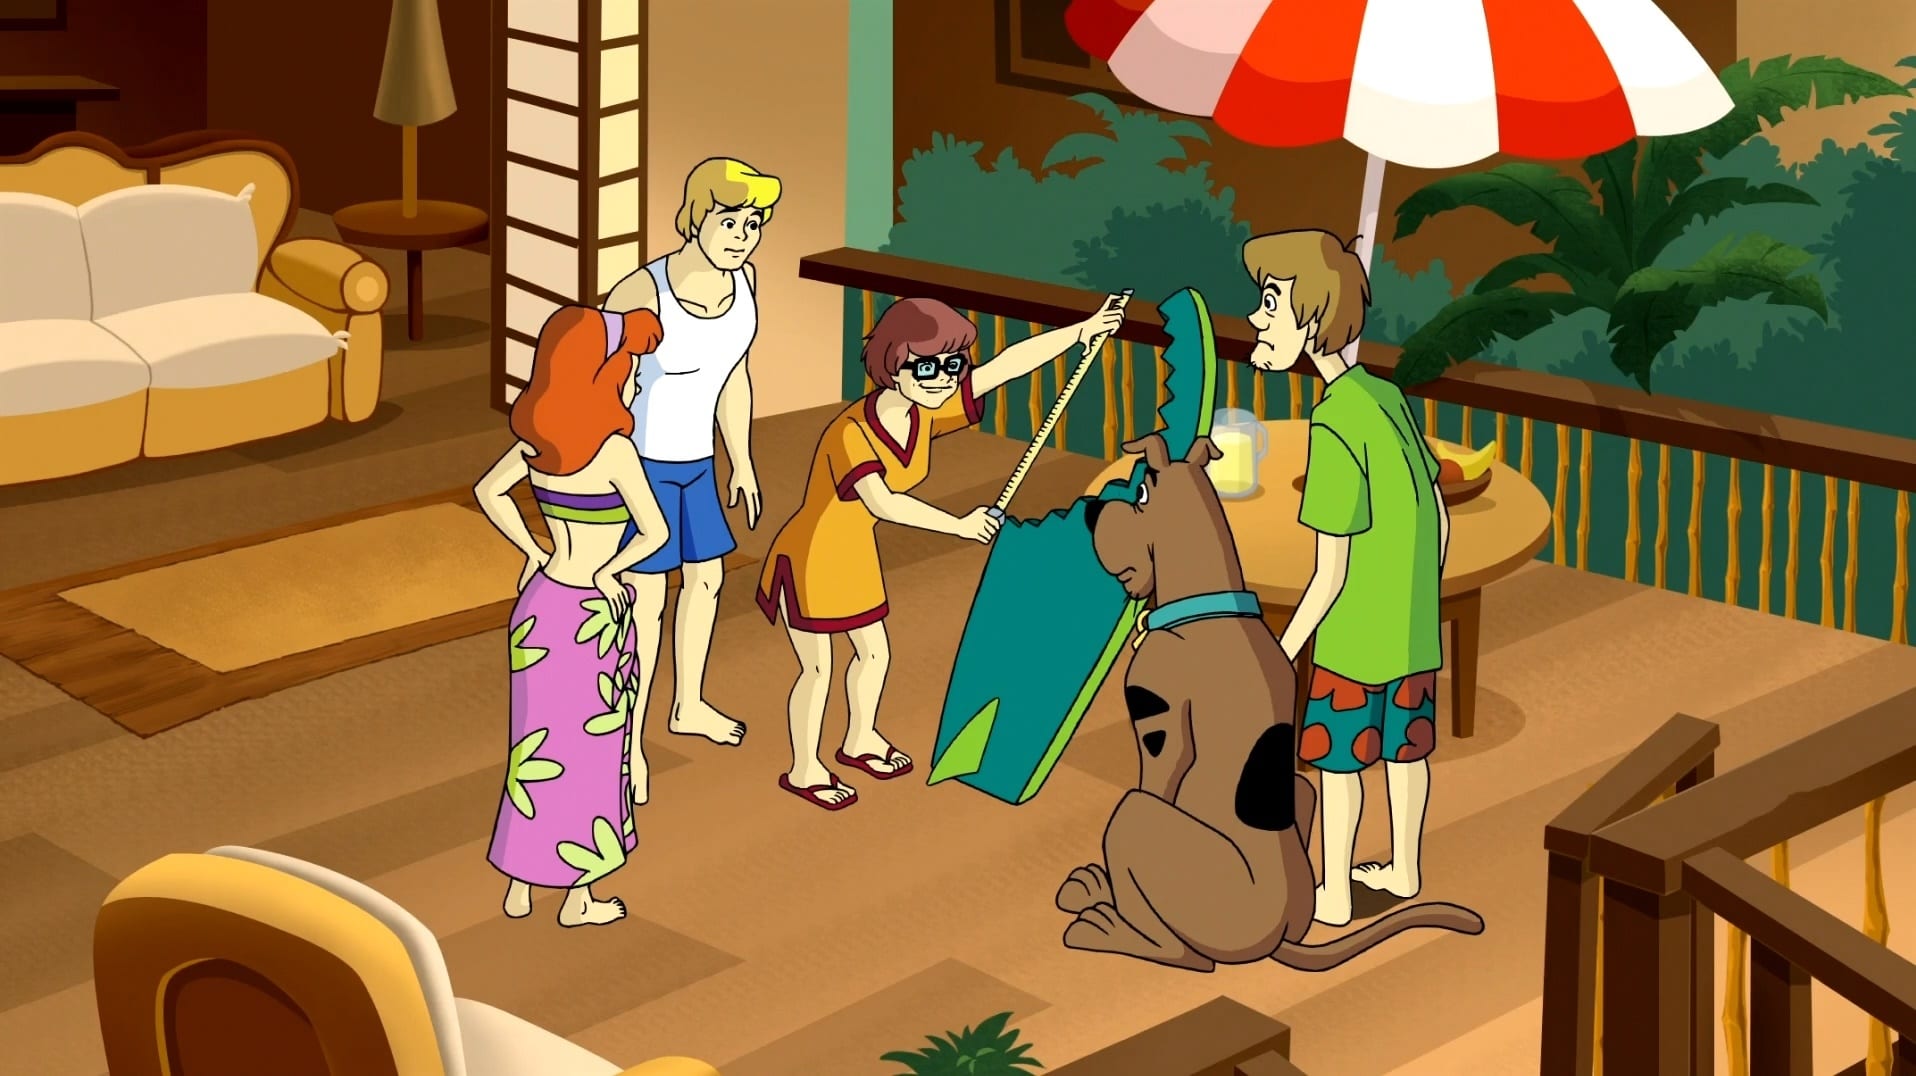 What's New, Scooby-Doo? - Season 1 Episode 9 : She Sees Sea Monsters by the Sea Shore